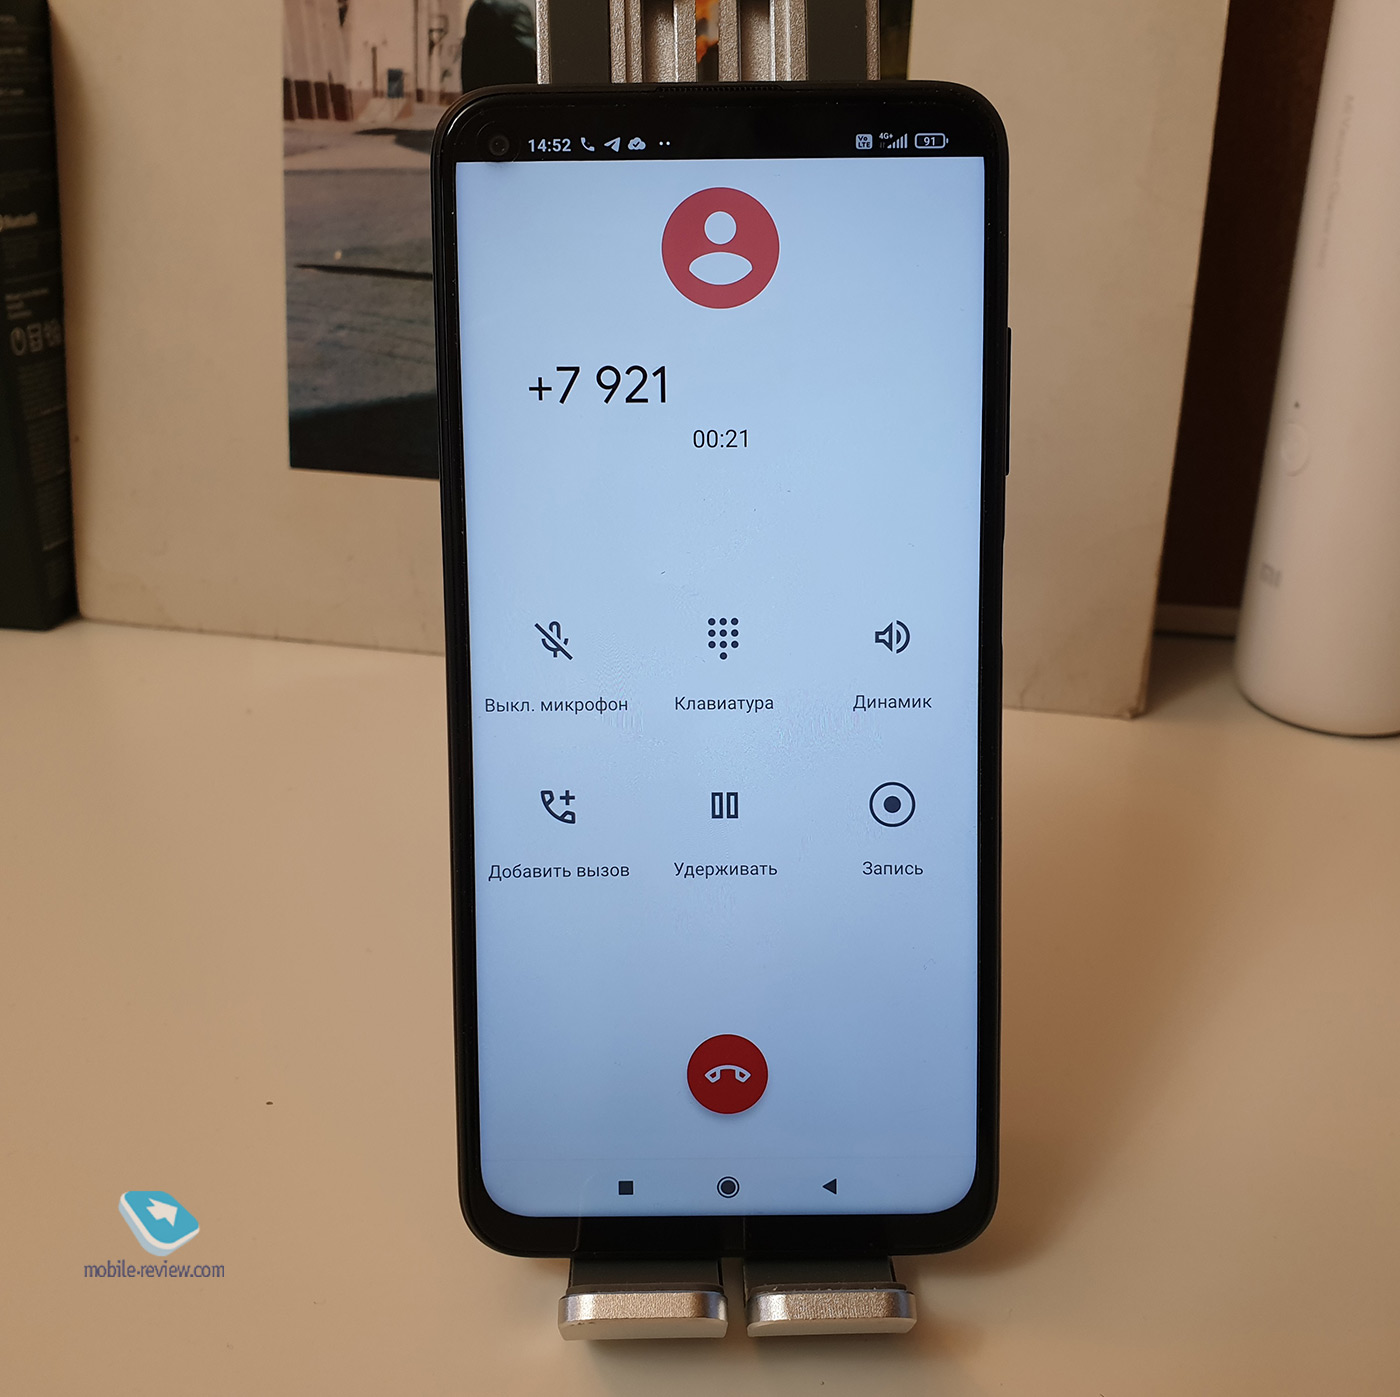 Xiaomi Redmi Note 9T review: an outstanding 5G smartphone in a country without 5G